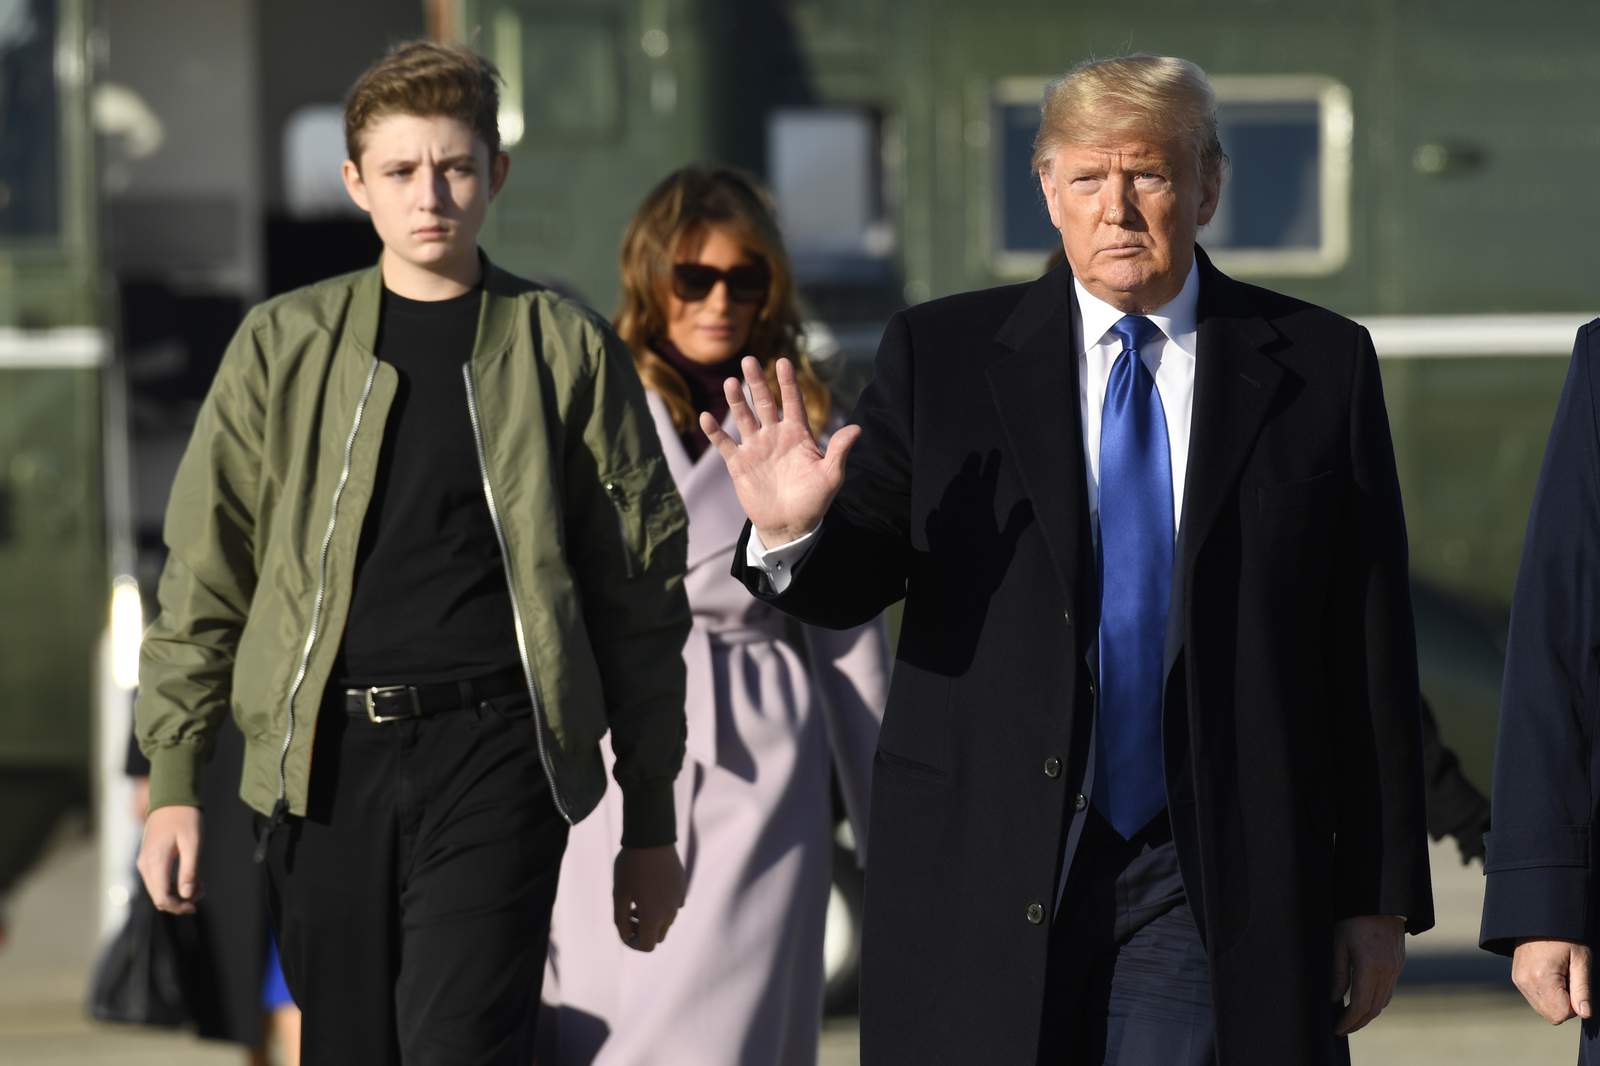 Aide: Media ignores Trump's loving bond with 13-year-old son